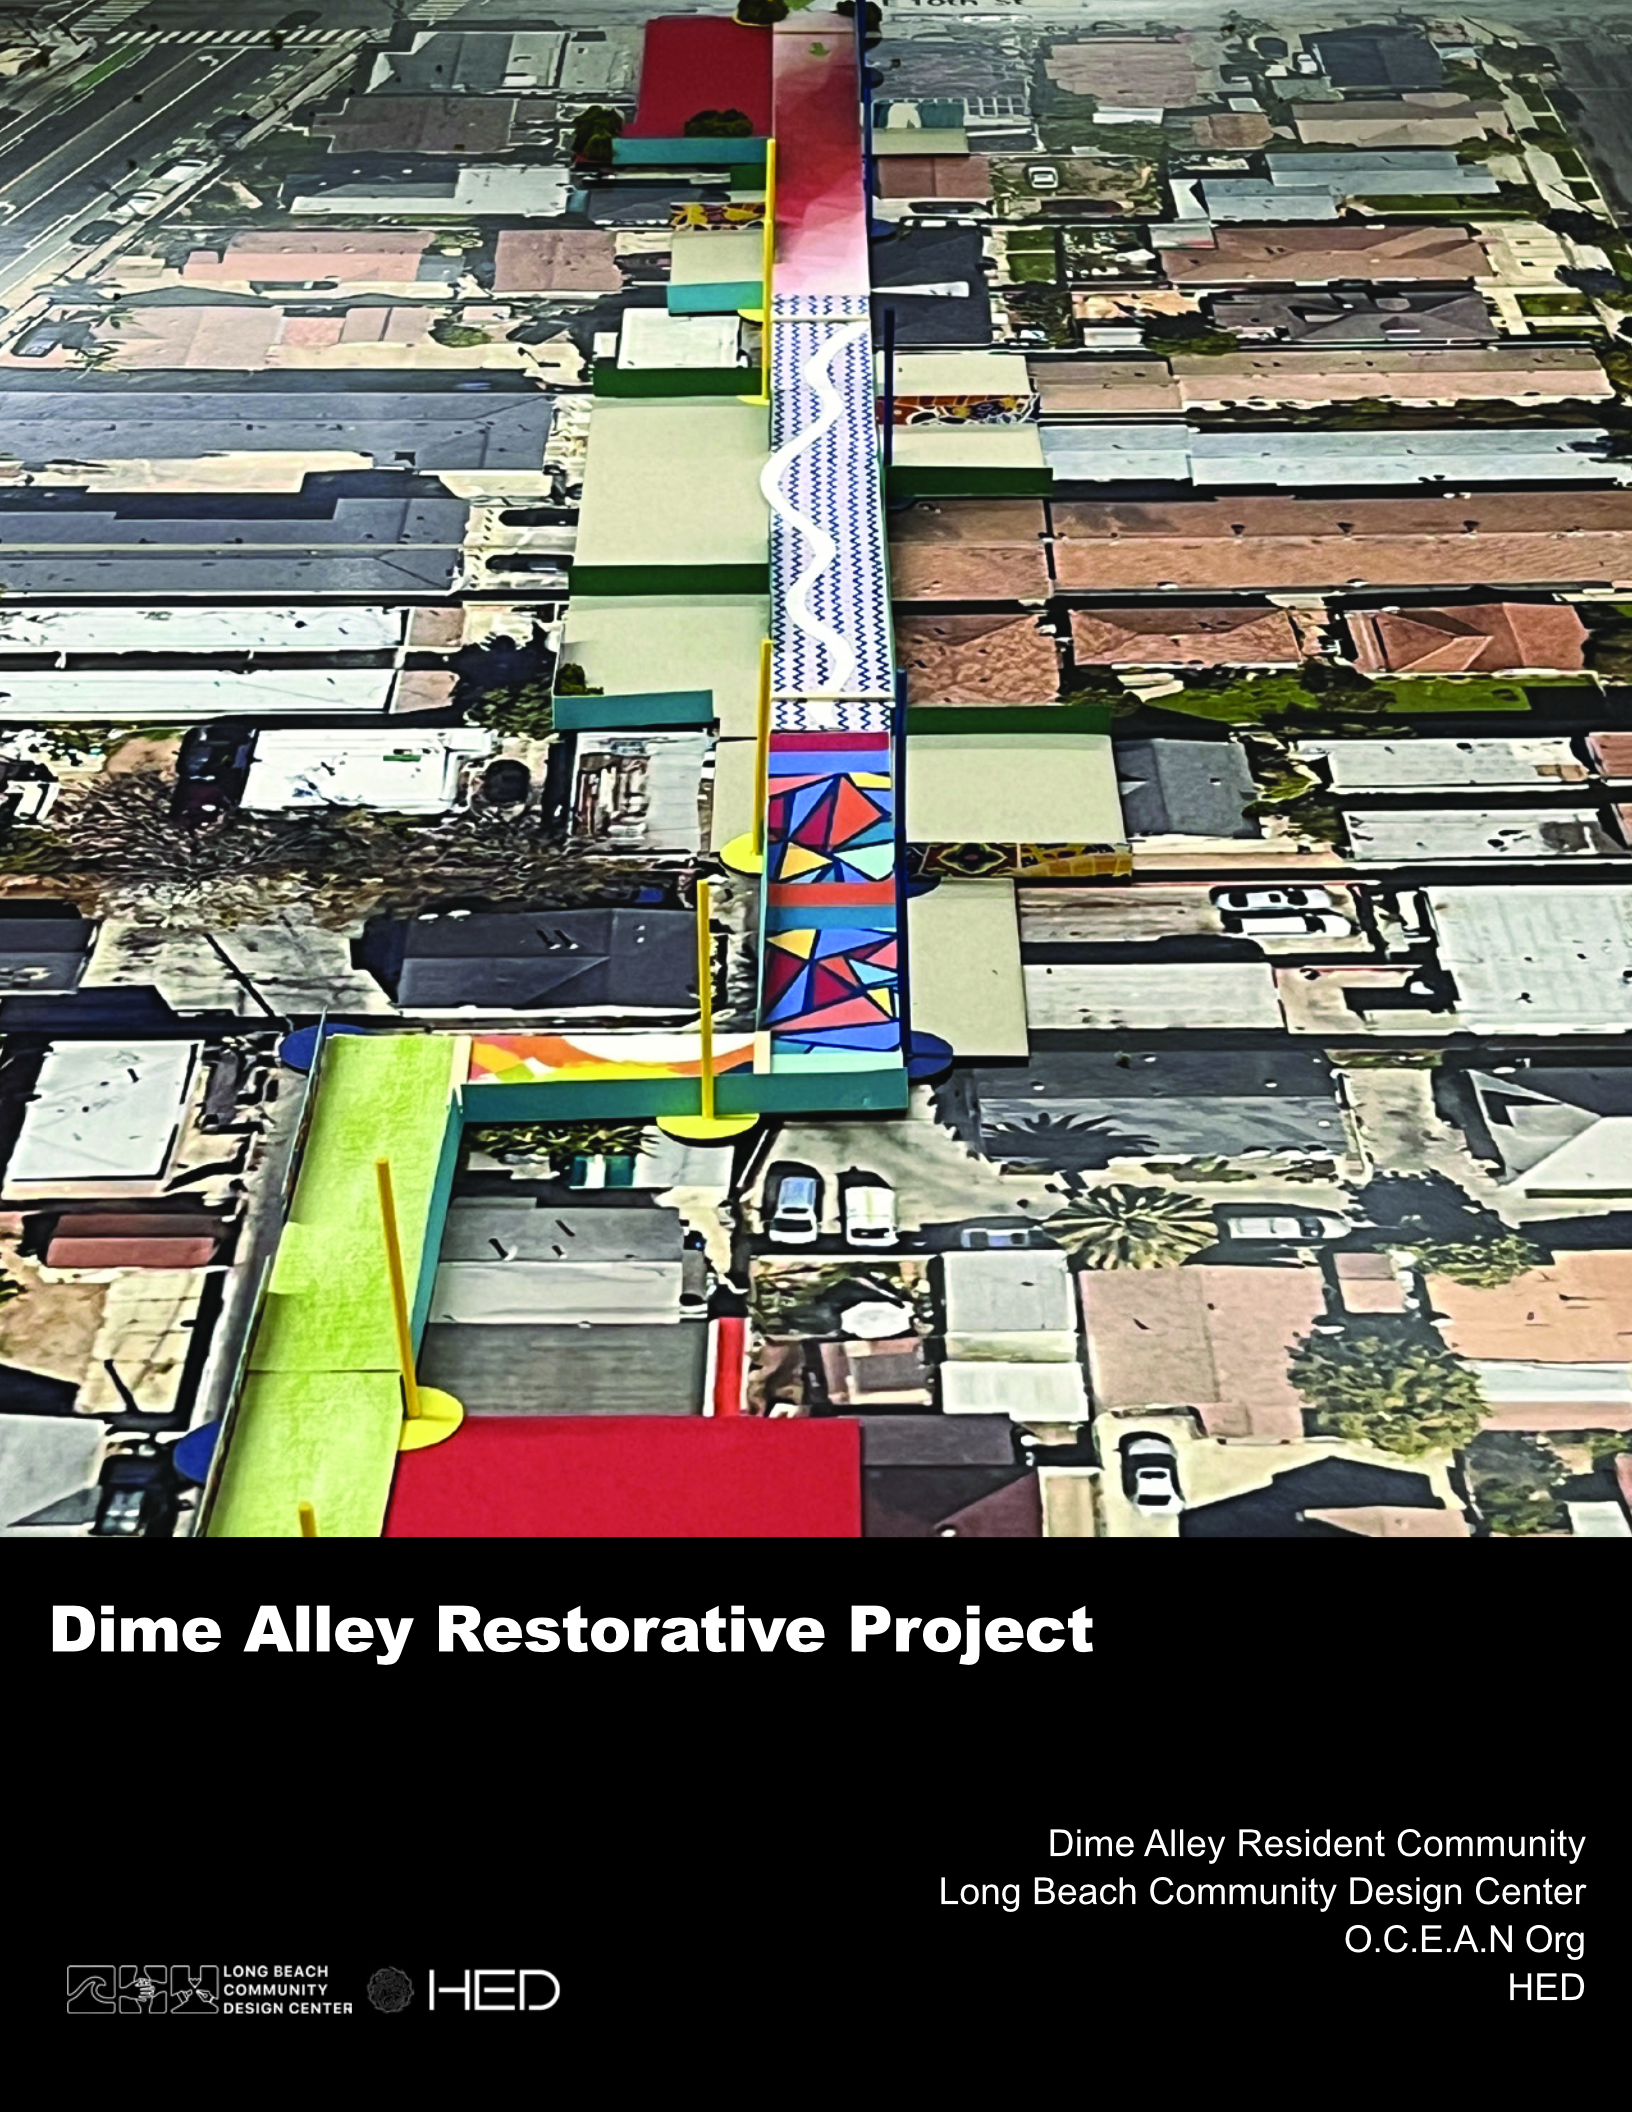 The Dime Alley Restoration Project